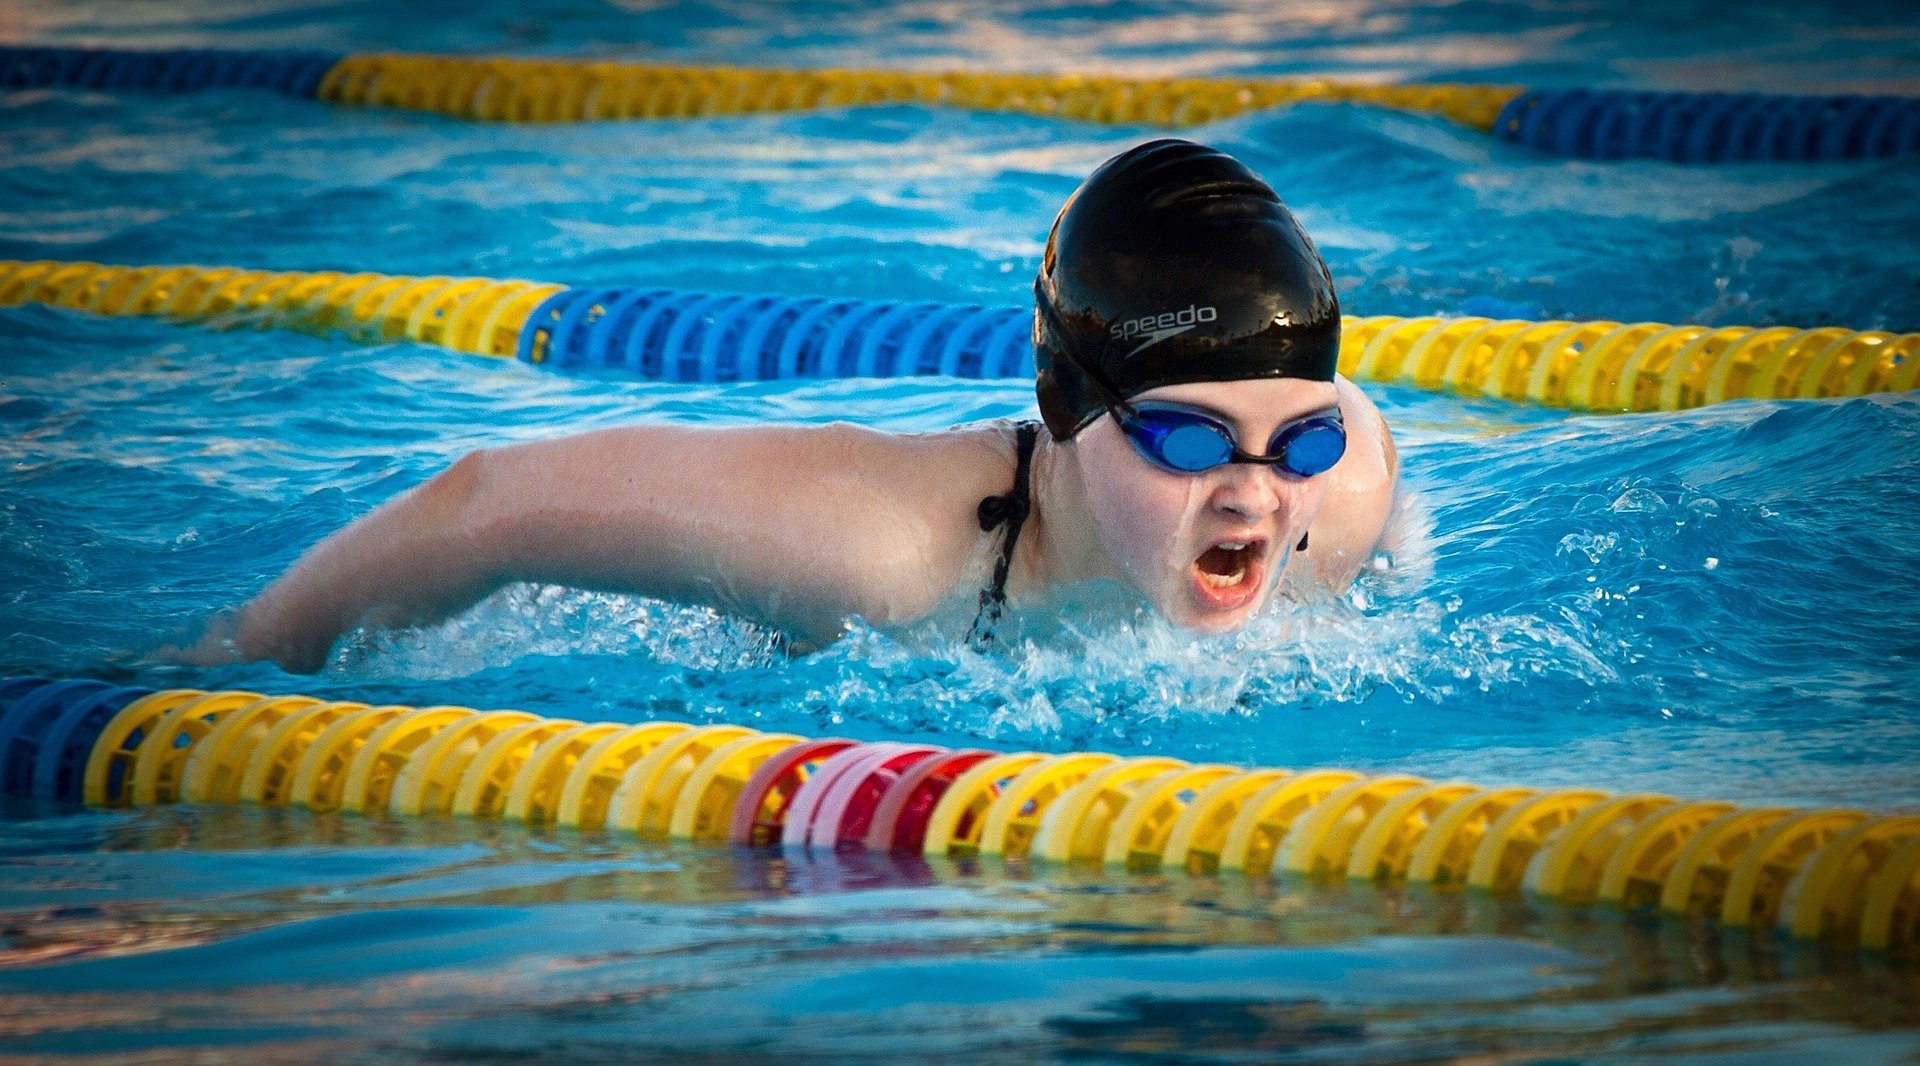 Symptoms, treatment and prevention of swimmer's itch